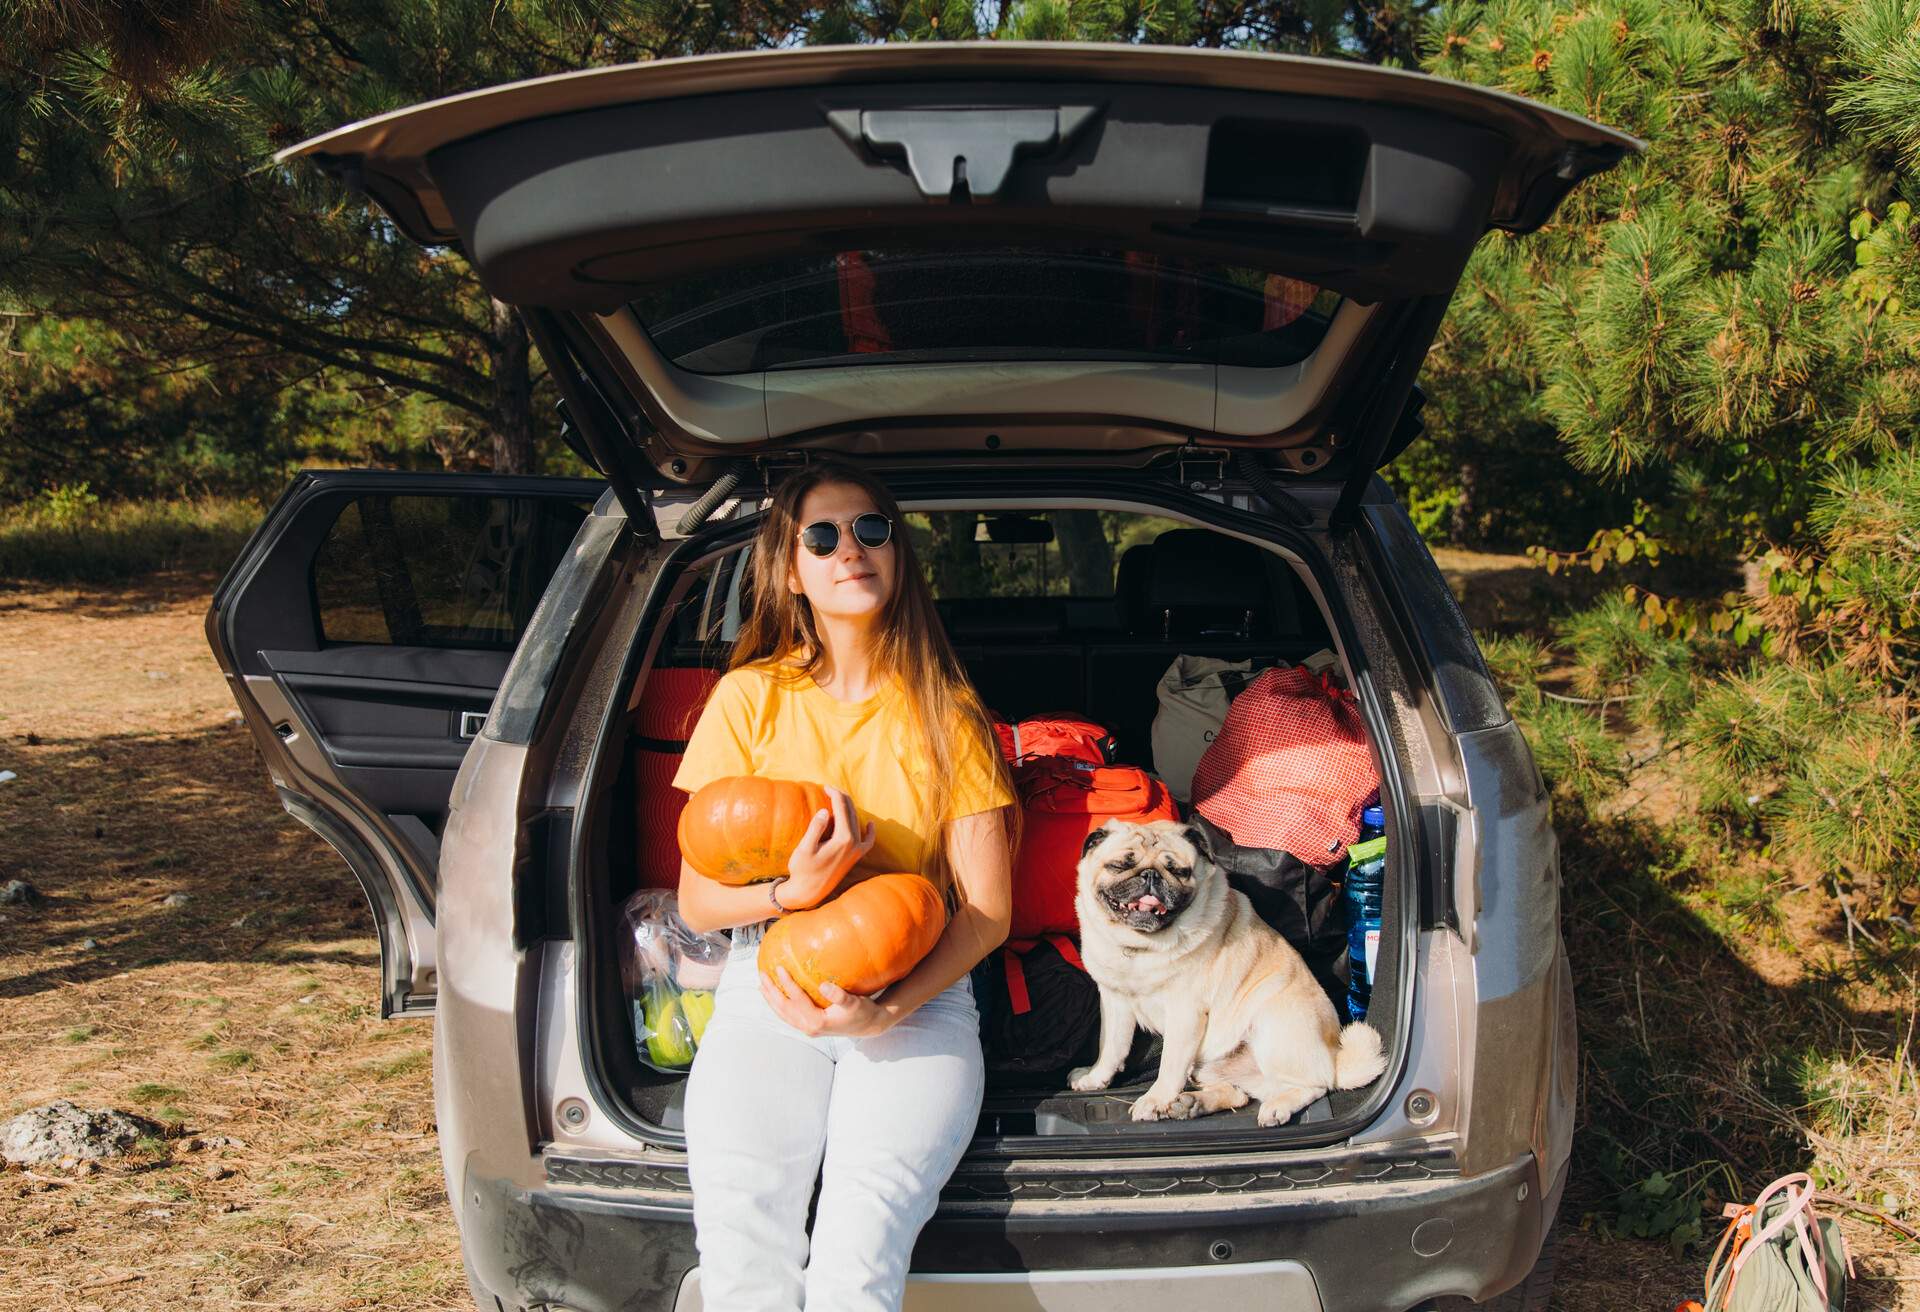 A woman sitting at the back of her car holds two pumpkins next to her pug.